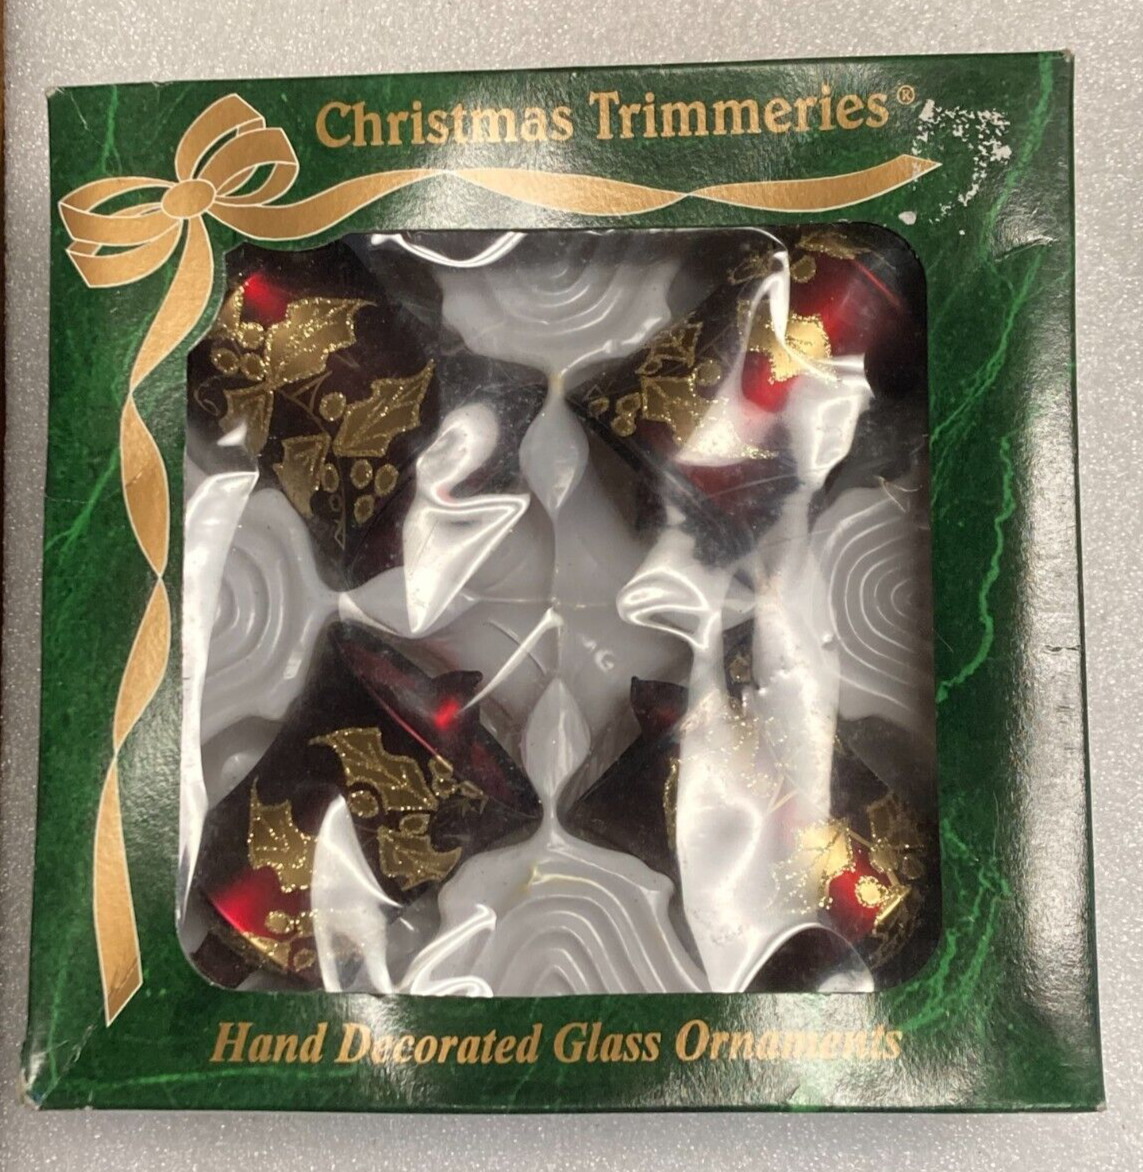 4 Vnt Christmas Trimmeries Ornaments Red & Gold Holly Bells Hand Decorated Glass